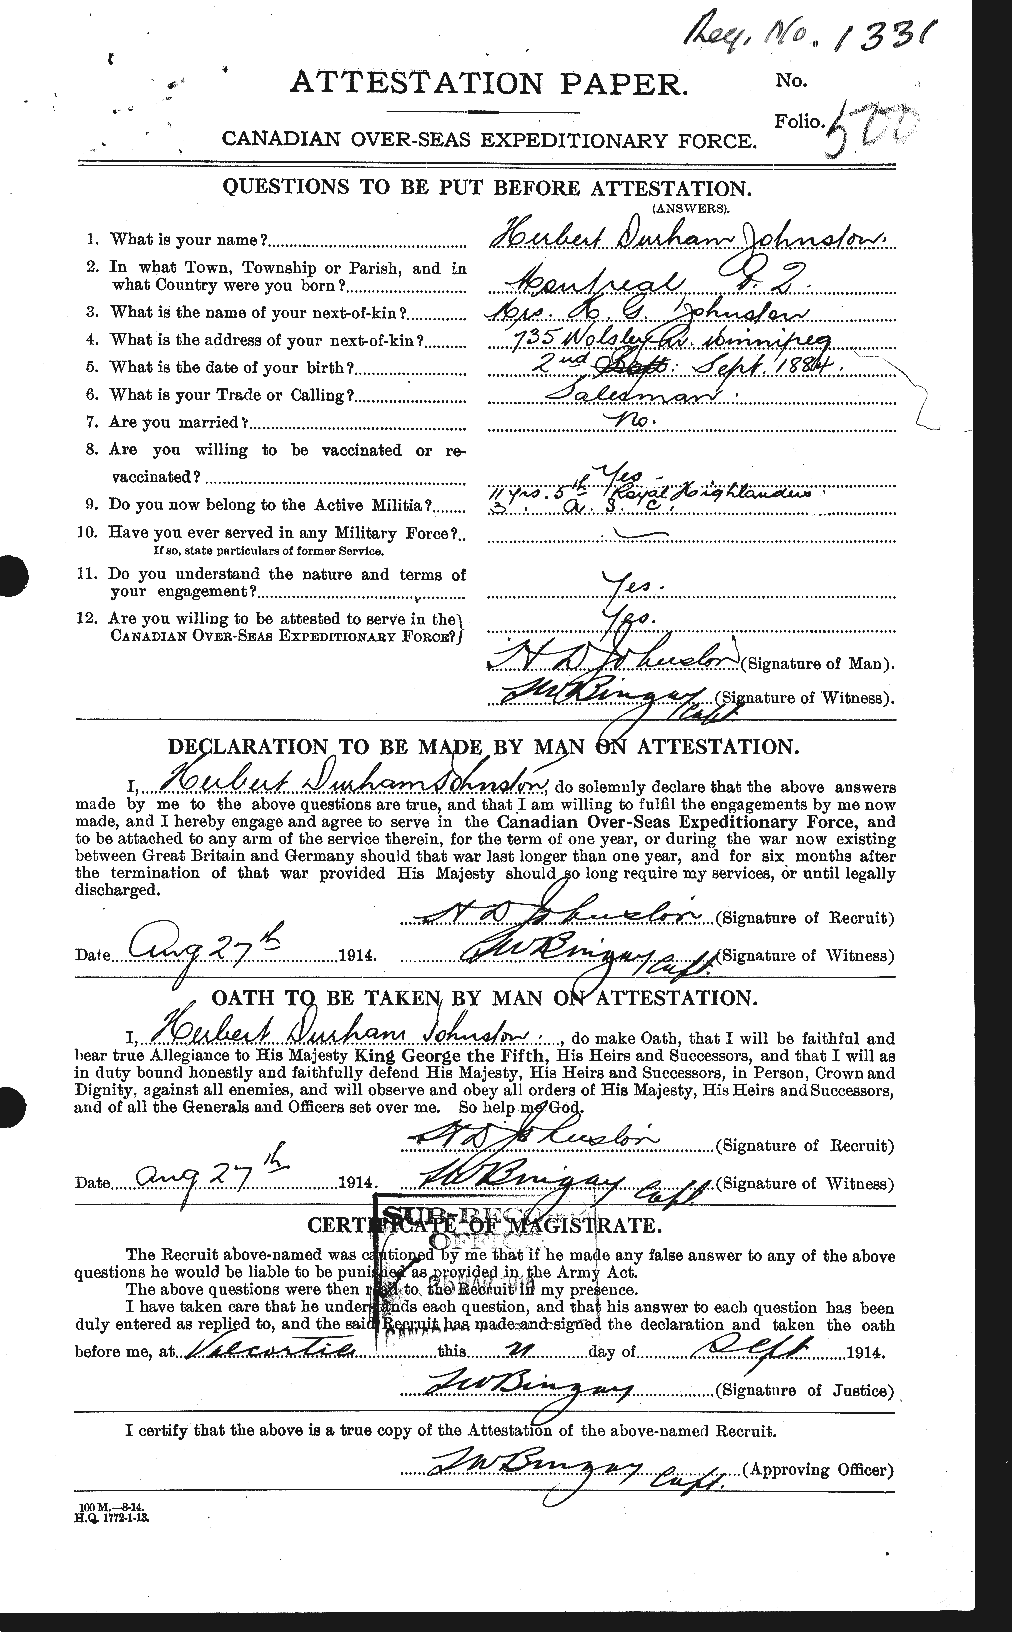 Personnel Records of the First World War - CEF 419556a